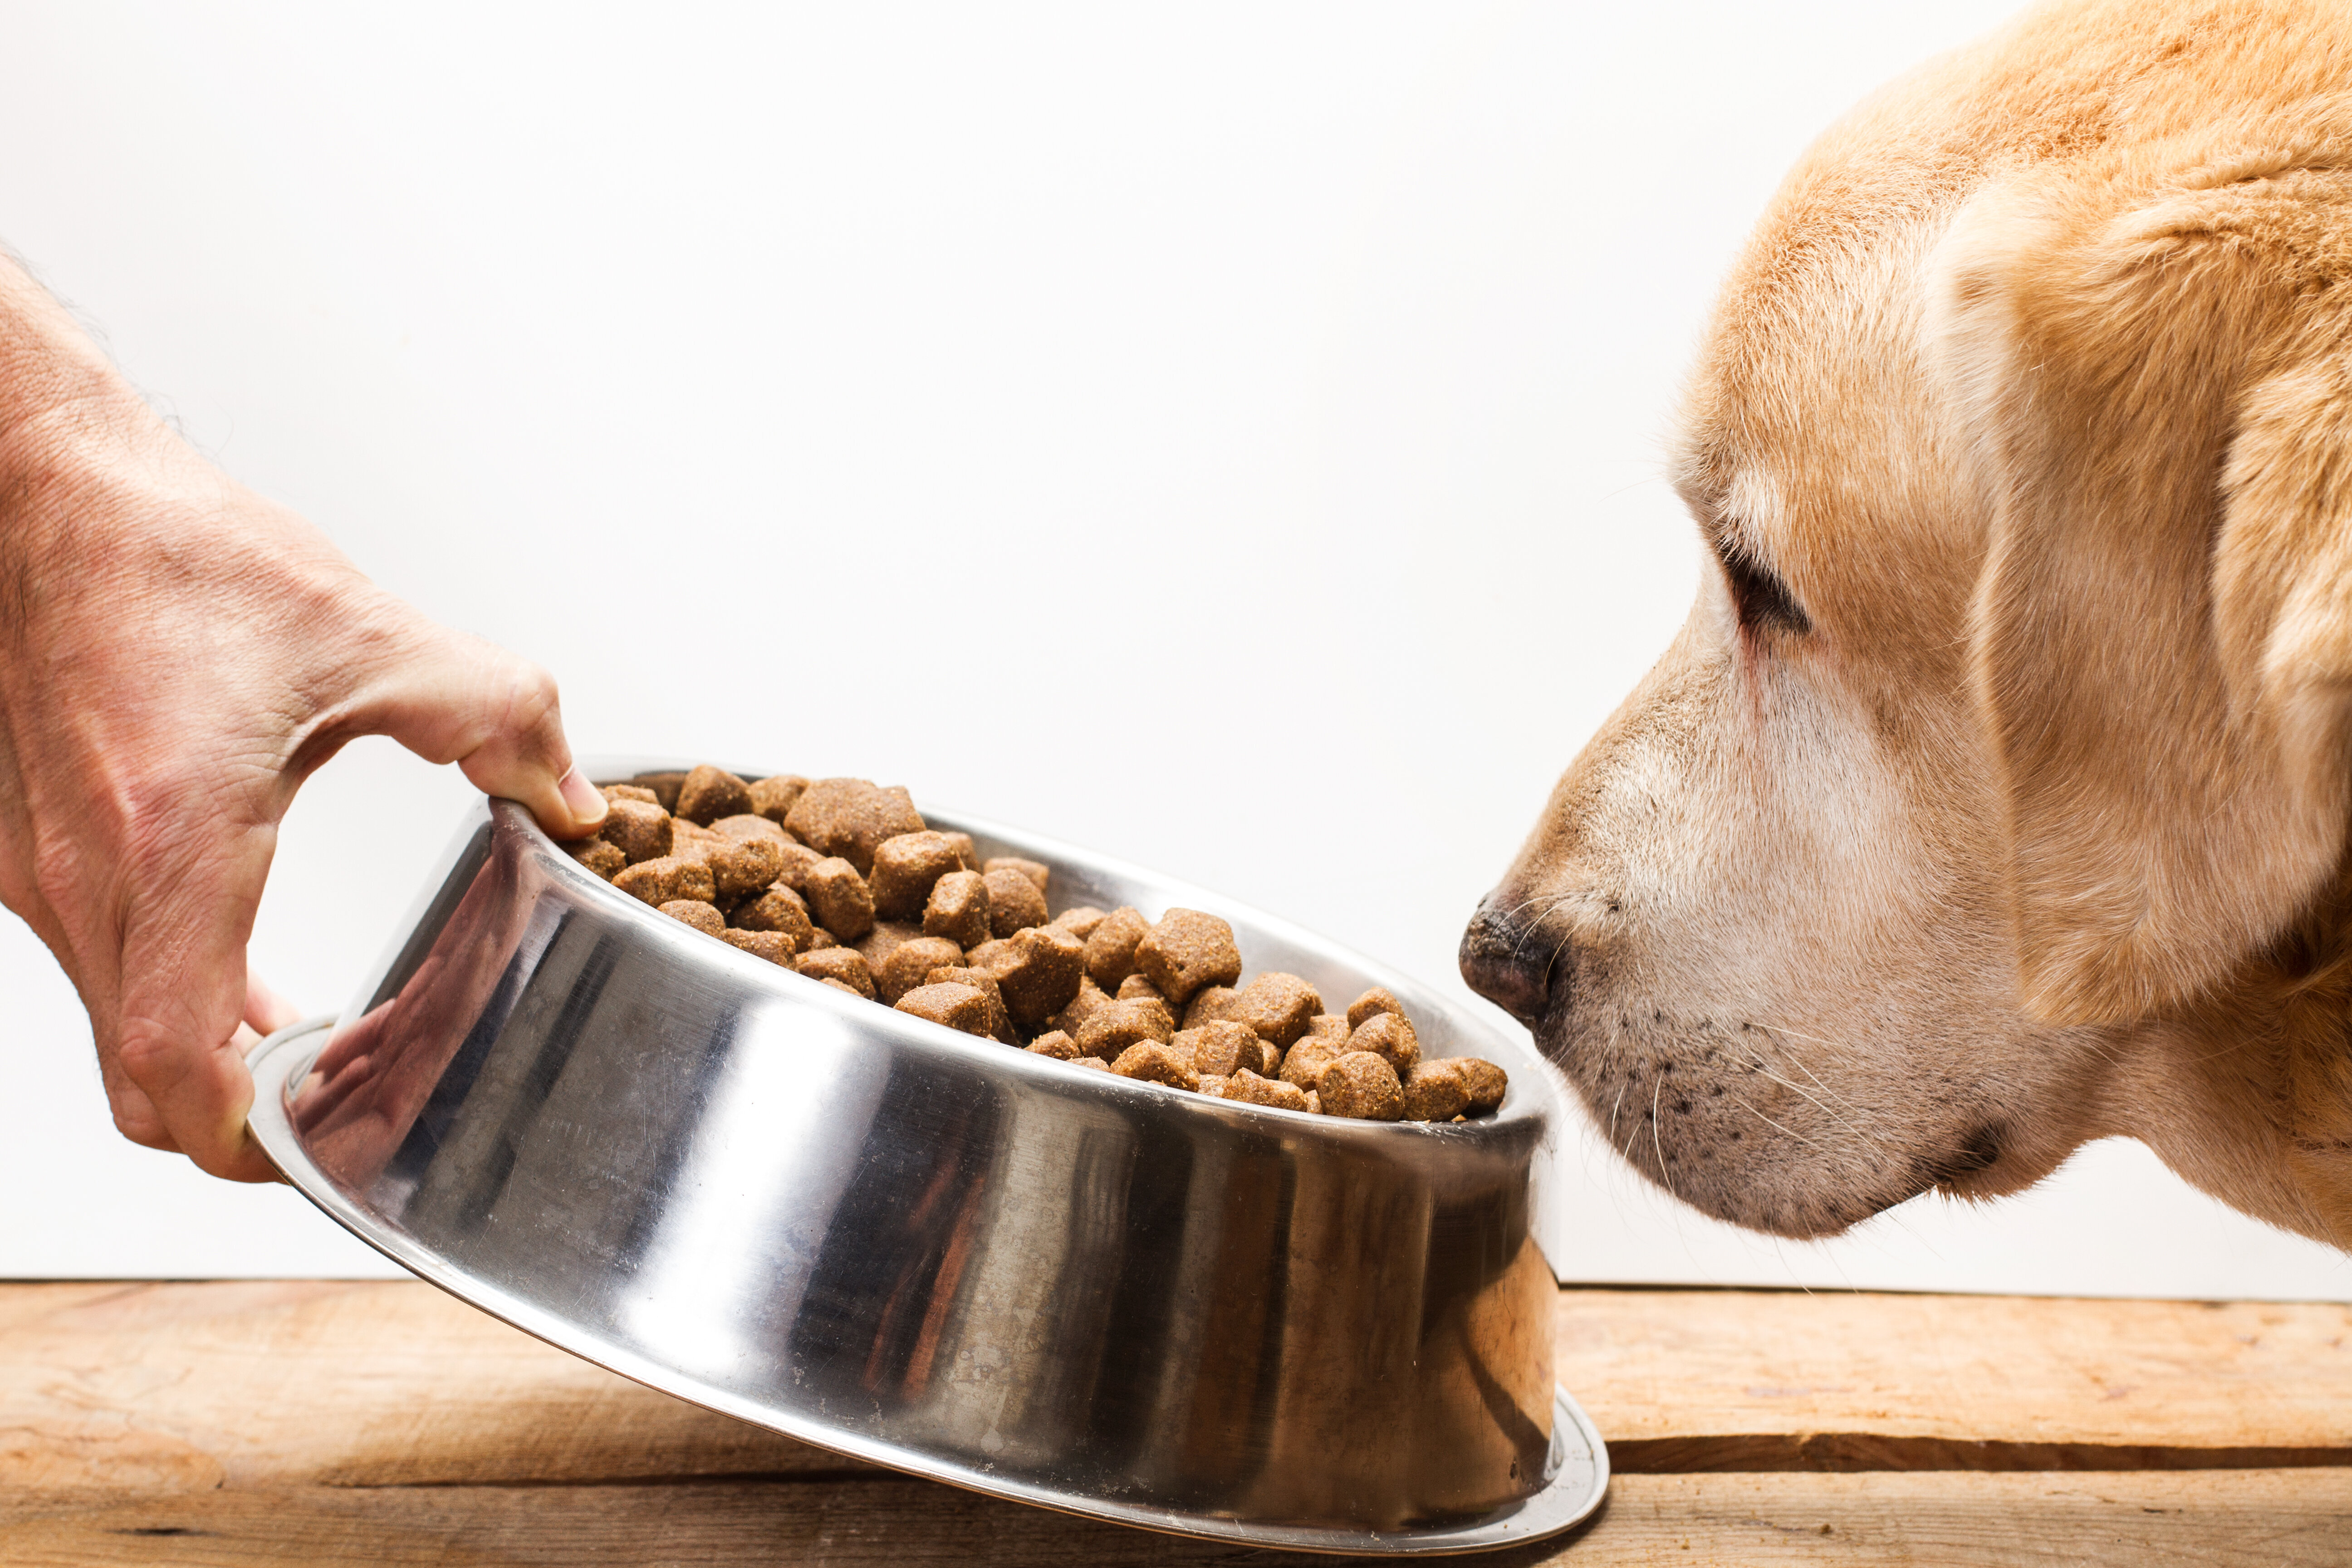 dry dog food causing heart problems